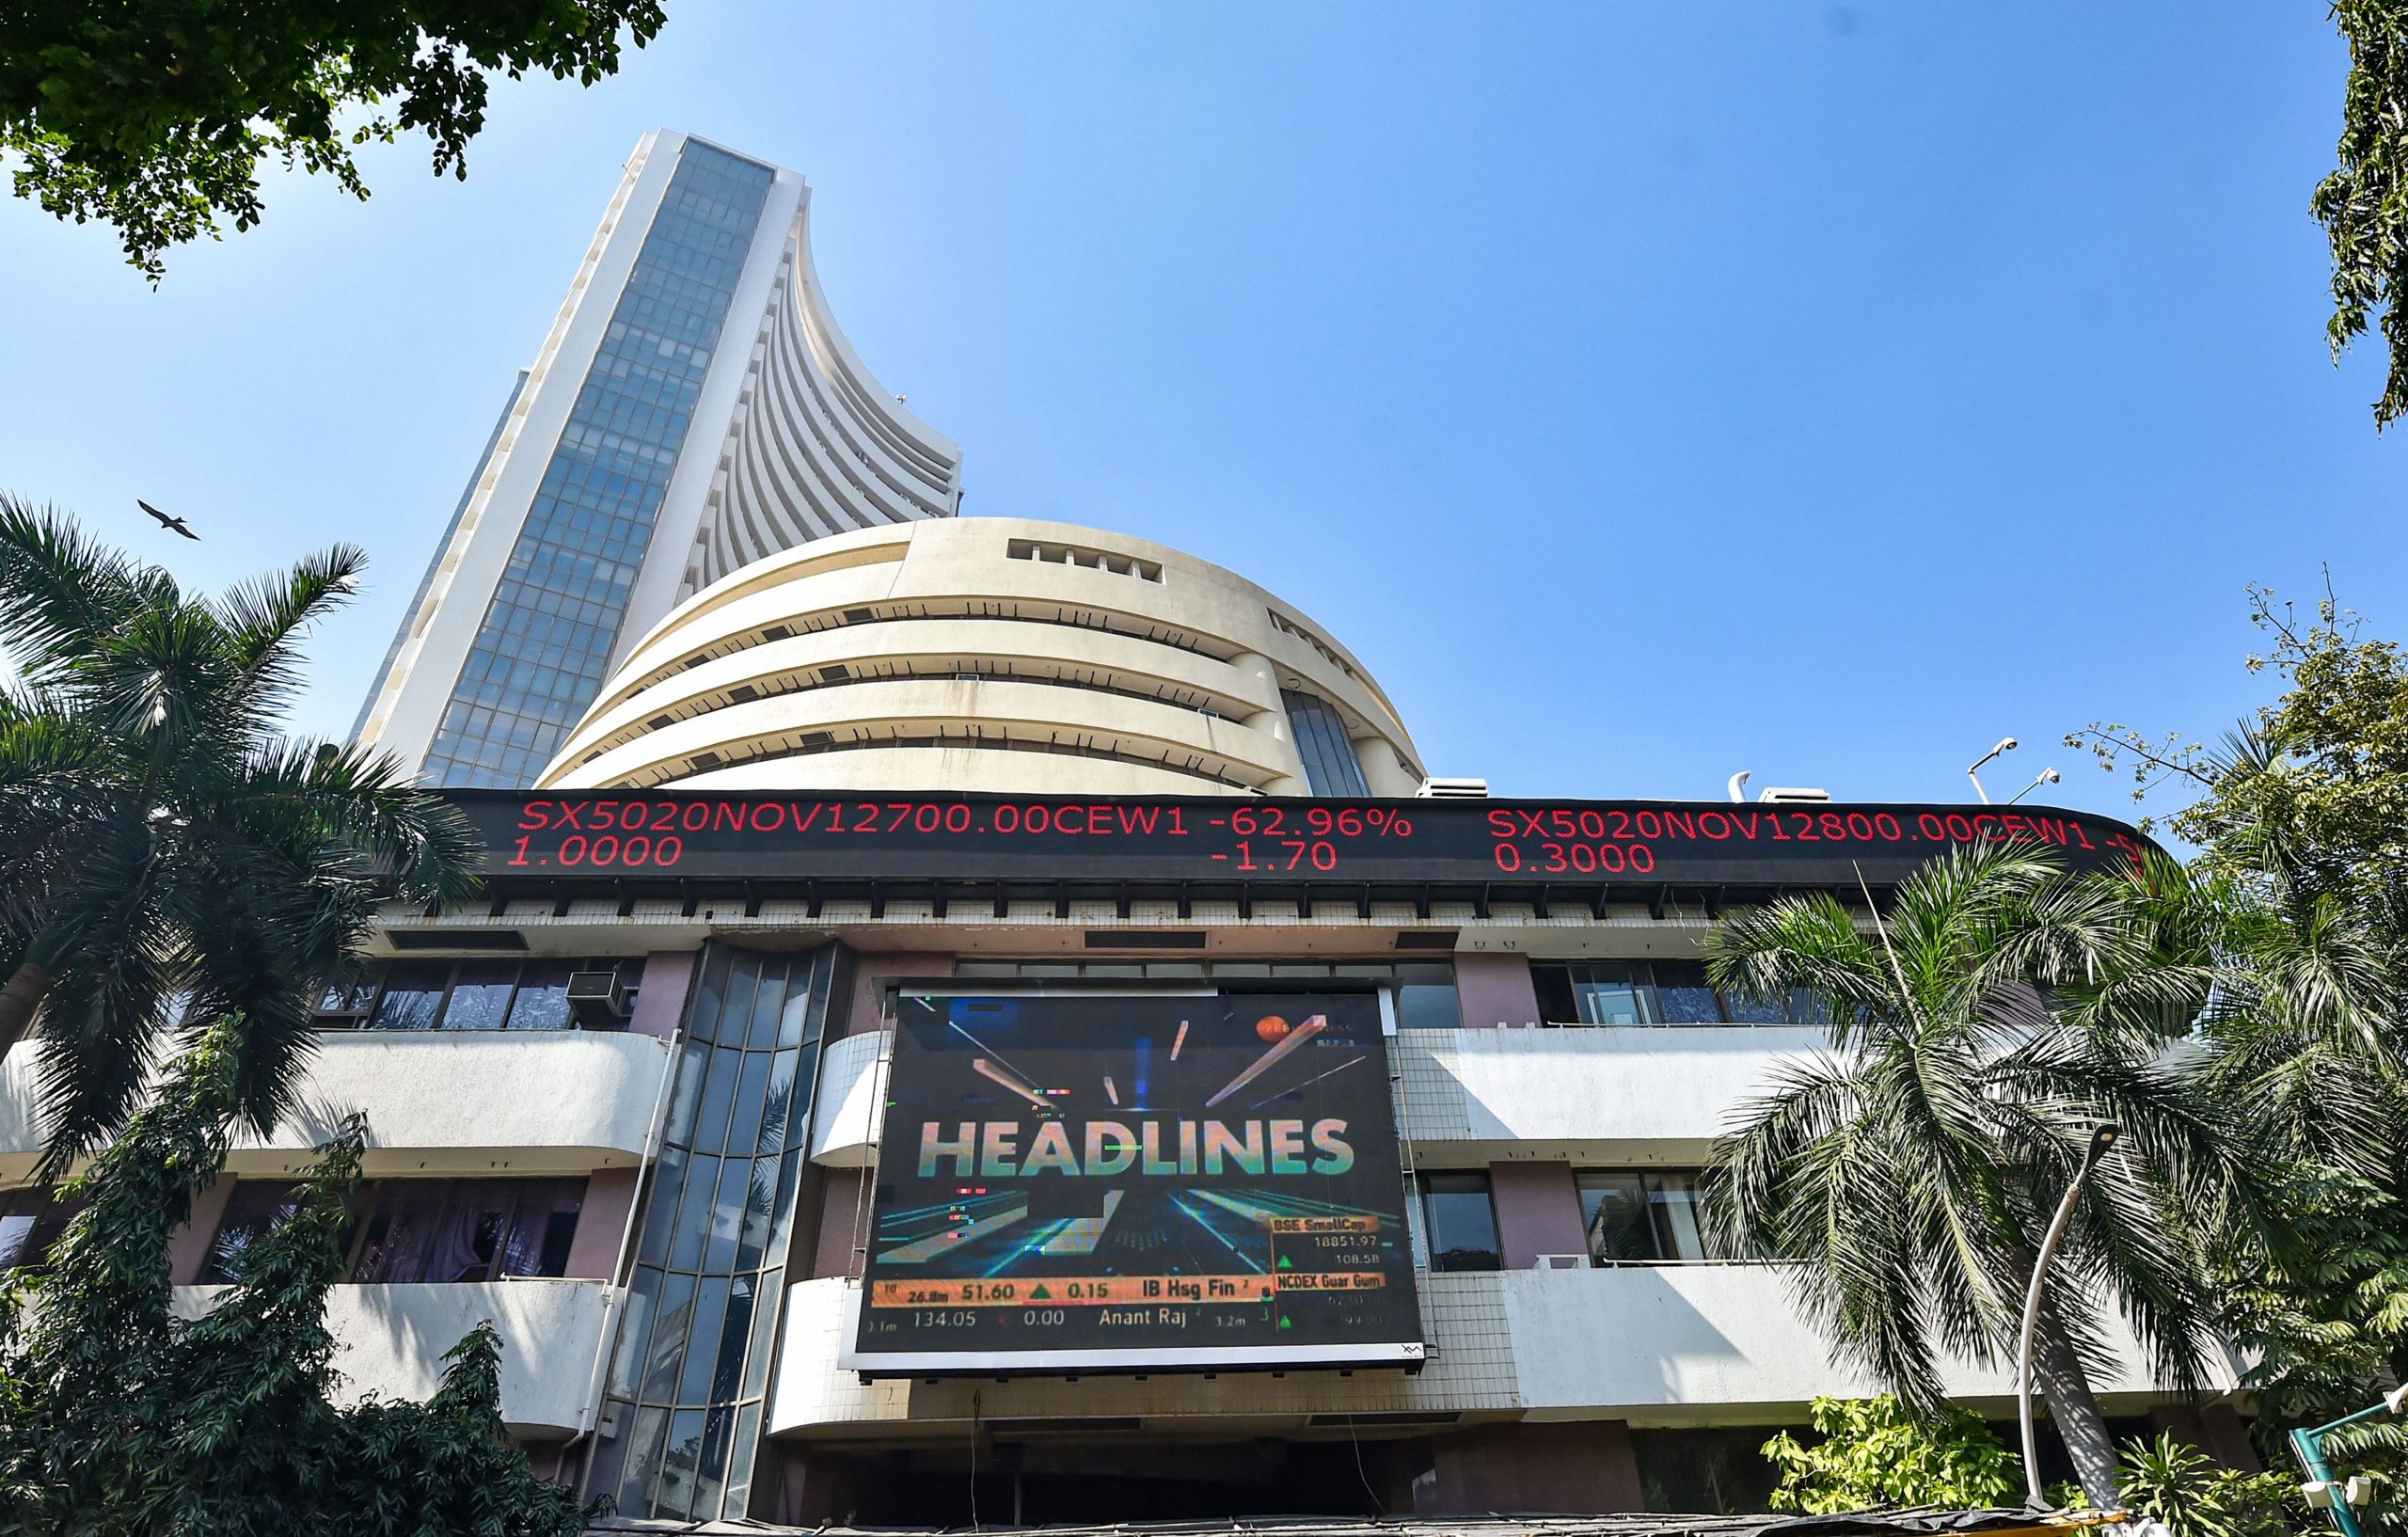 Trending Stocks: Biocon, Bharat Electronics, Wipro and others in news today